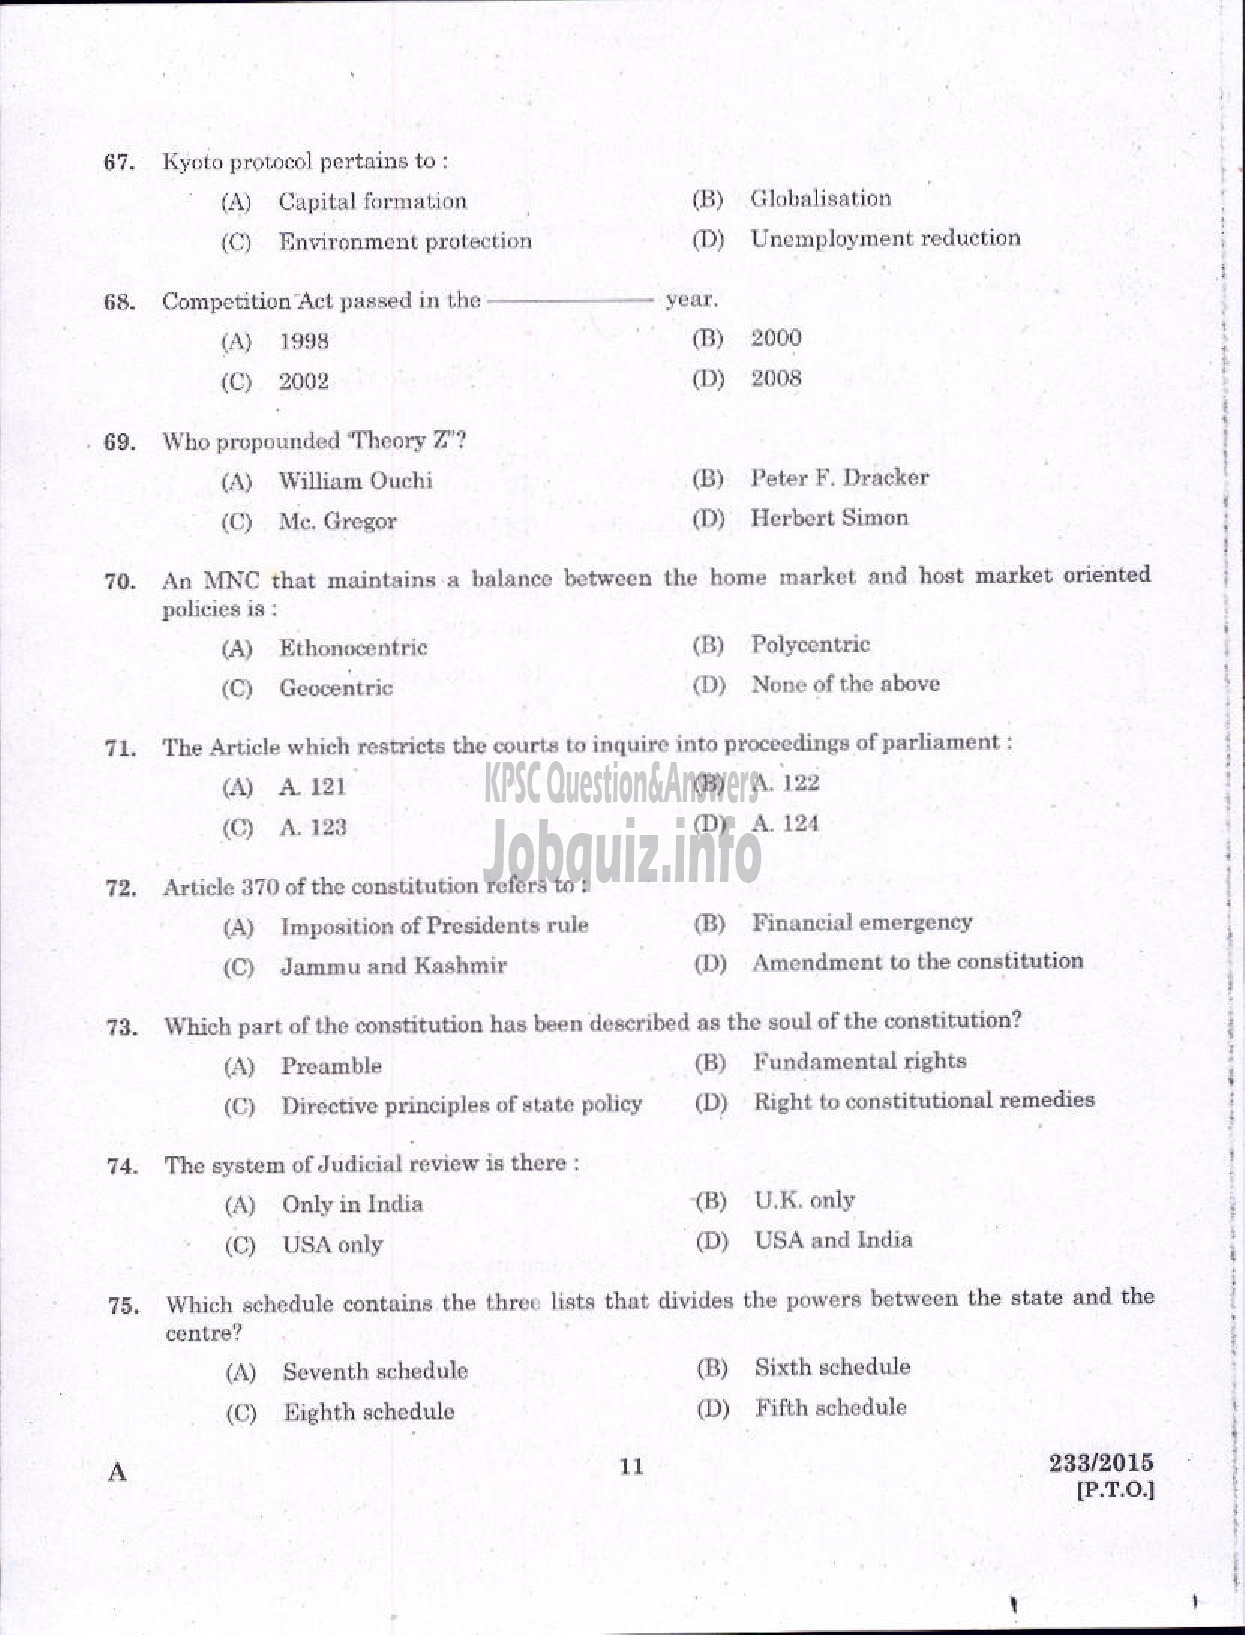 Kerala PSC Question Paper - LECTURER IN COMMERCE TECHNICAL EDUCATION-9